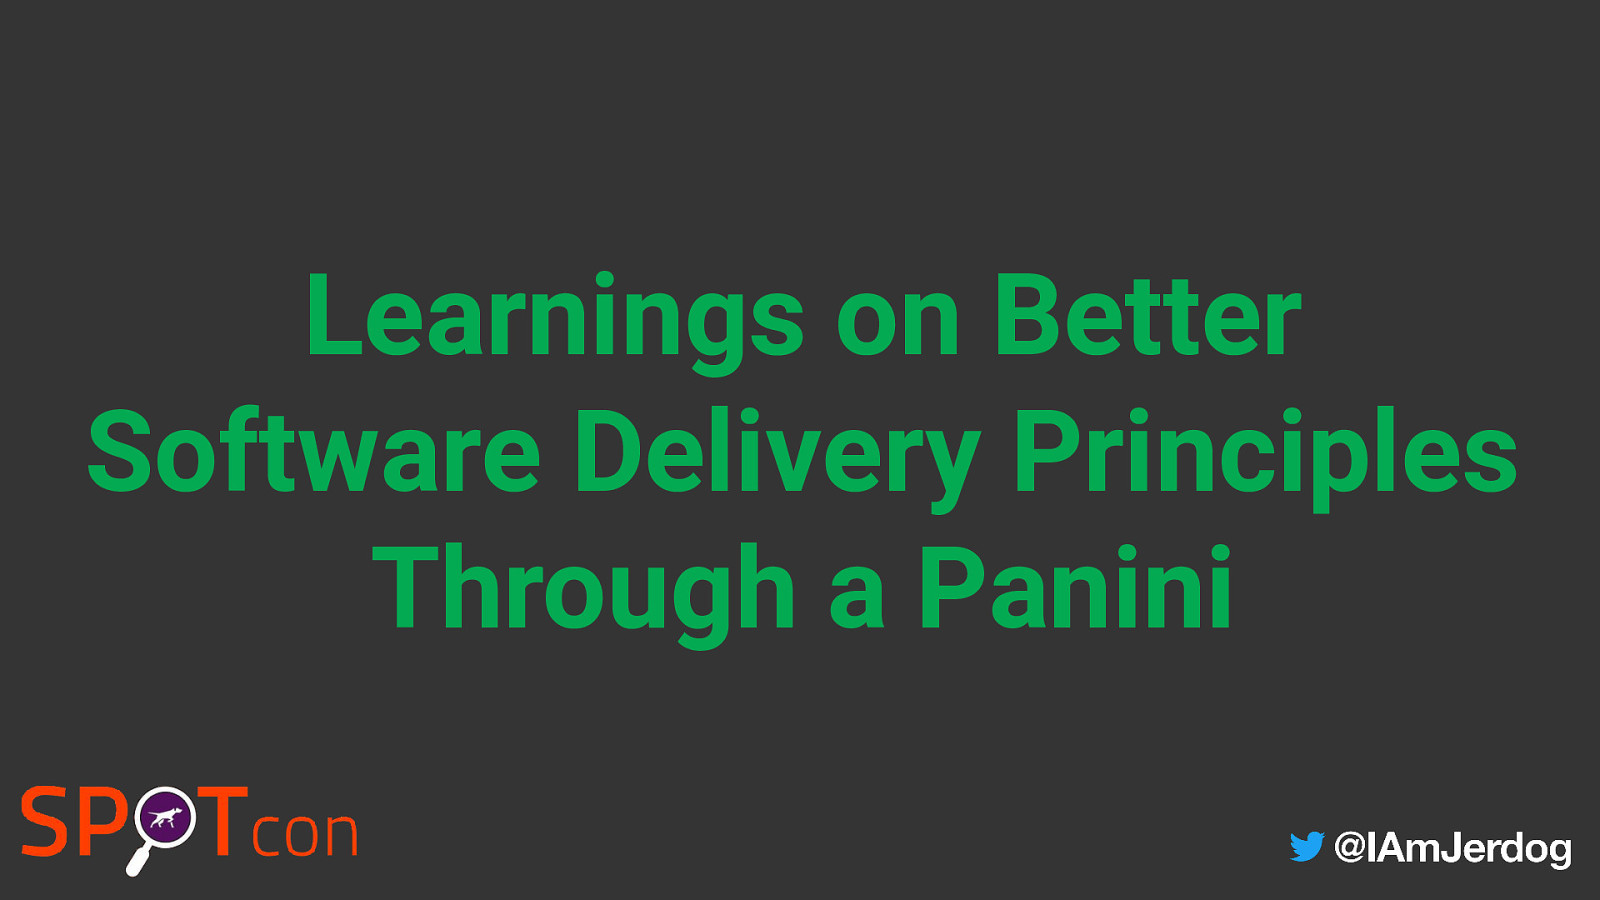 Things we’ve learned about better software delivery principles through a pandemic